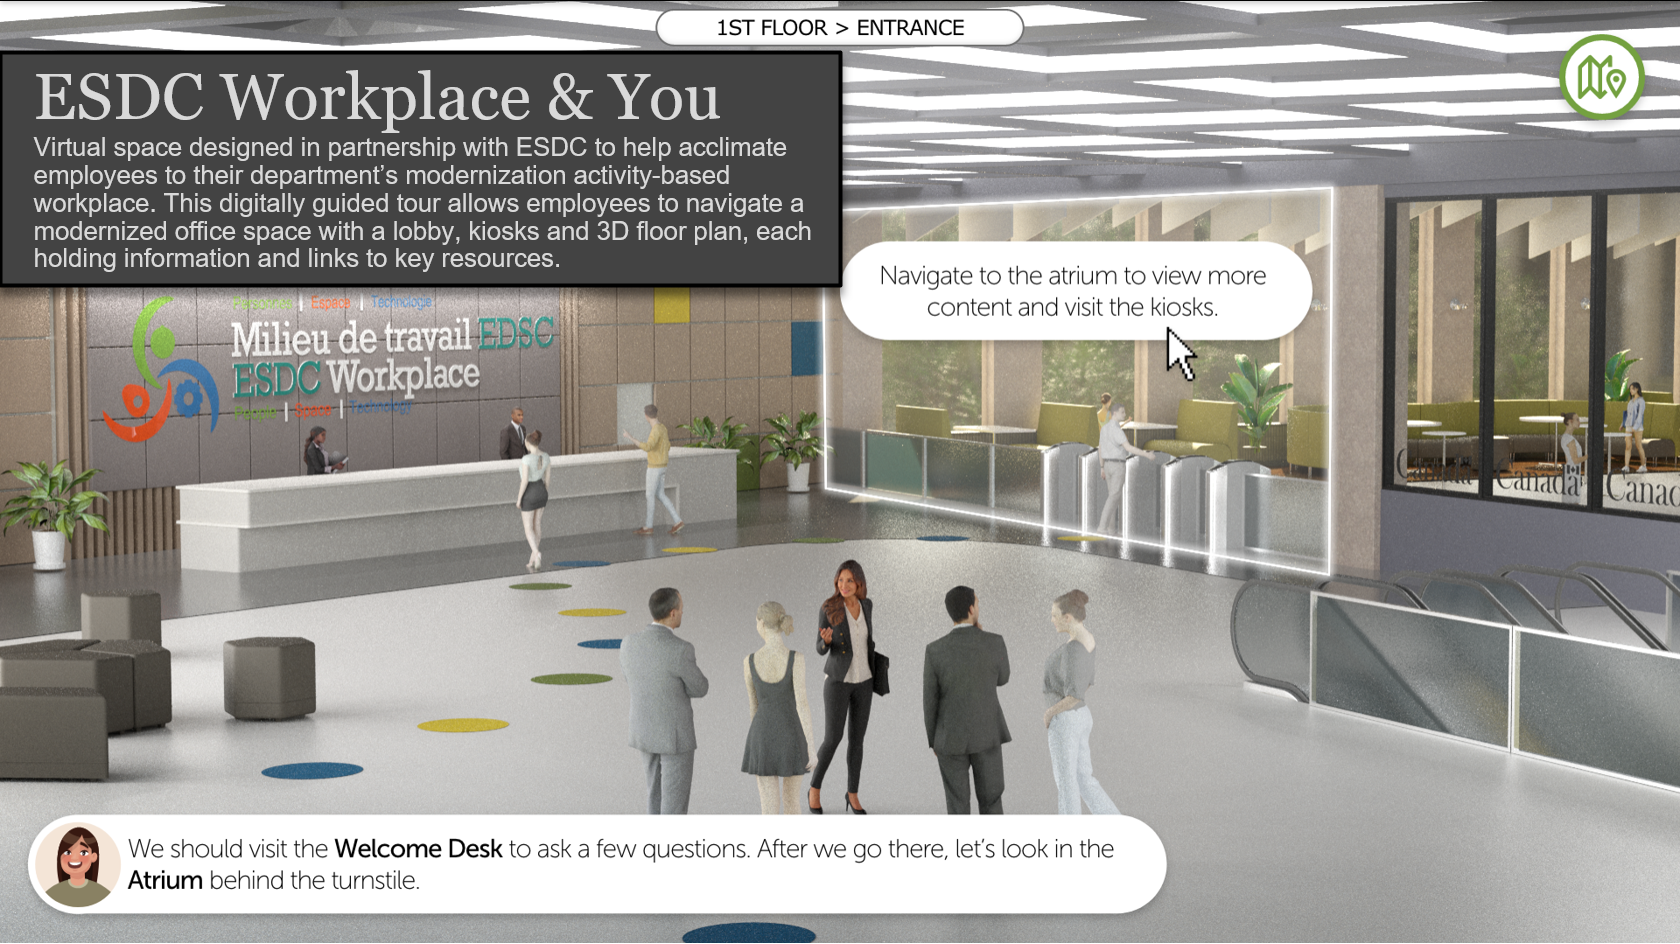 Image of the virtual lobby from the ESDC Workplace and You prototype